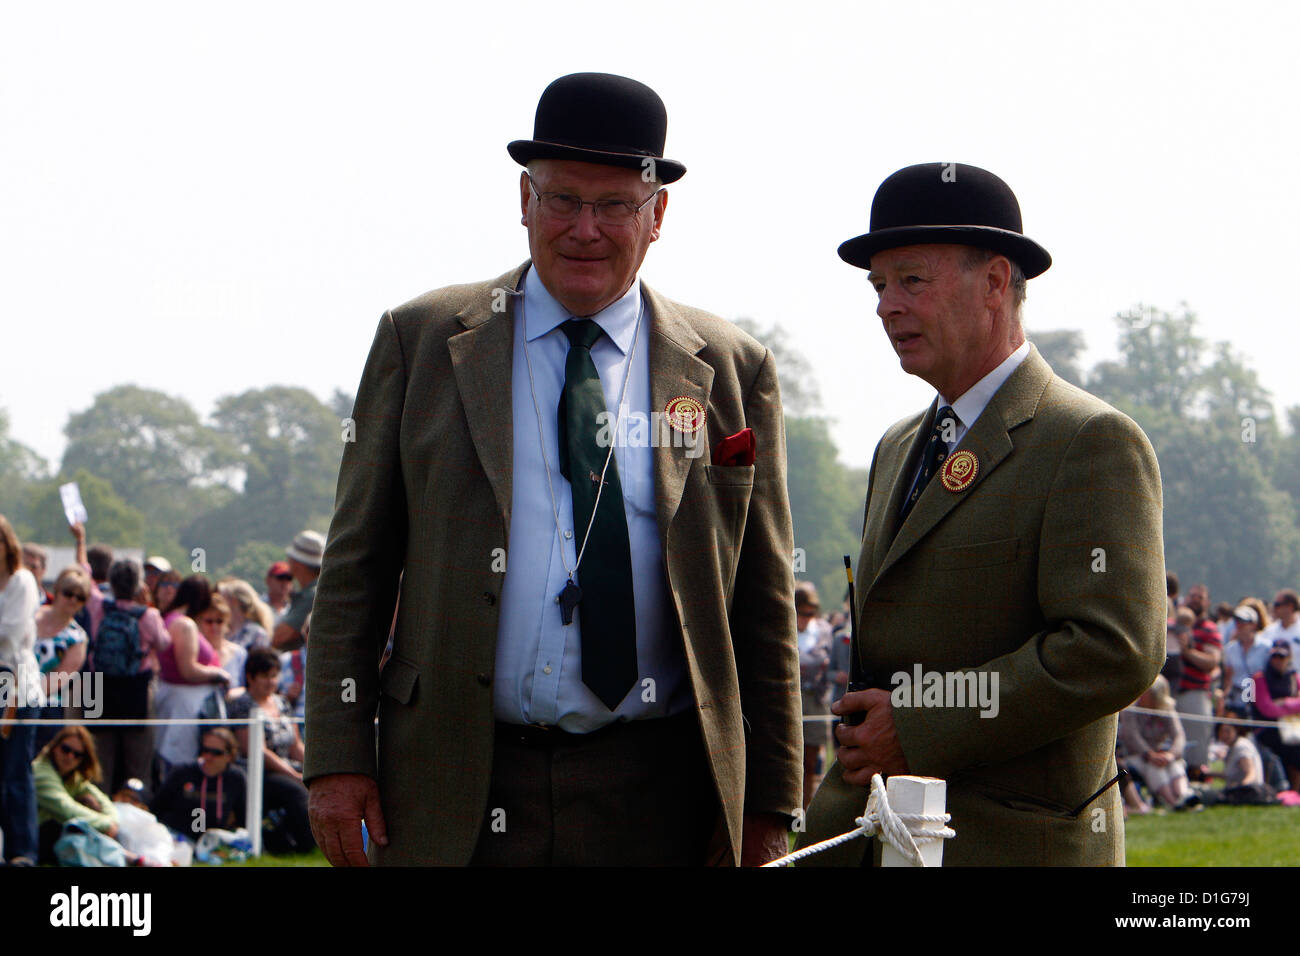 24.04.2011 Judges at Equestrian - Badminton Horse Trials - Cross Country Credit James Galvin / Alamy Stock Photo